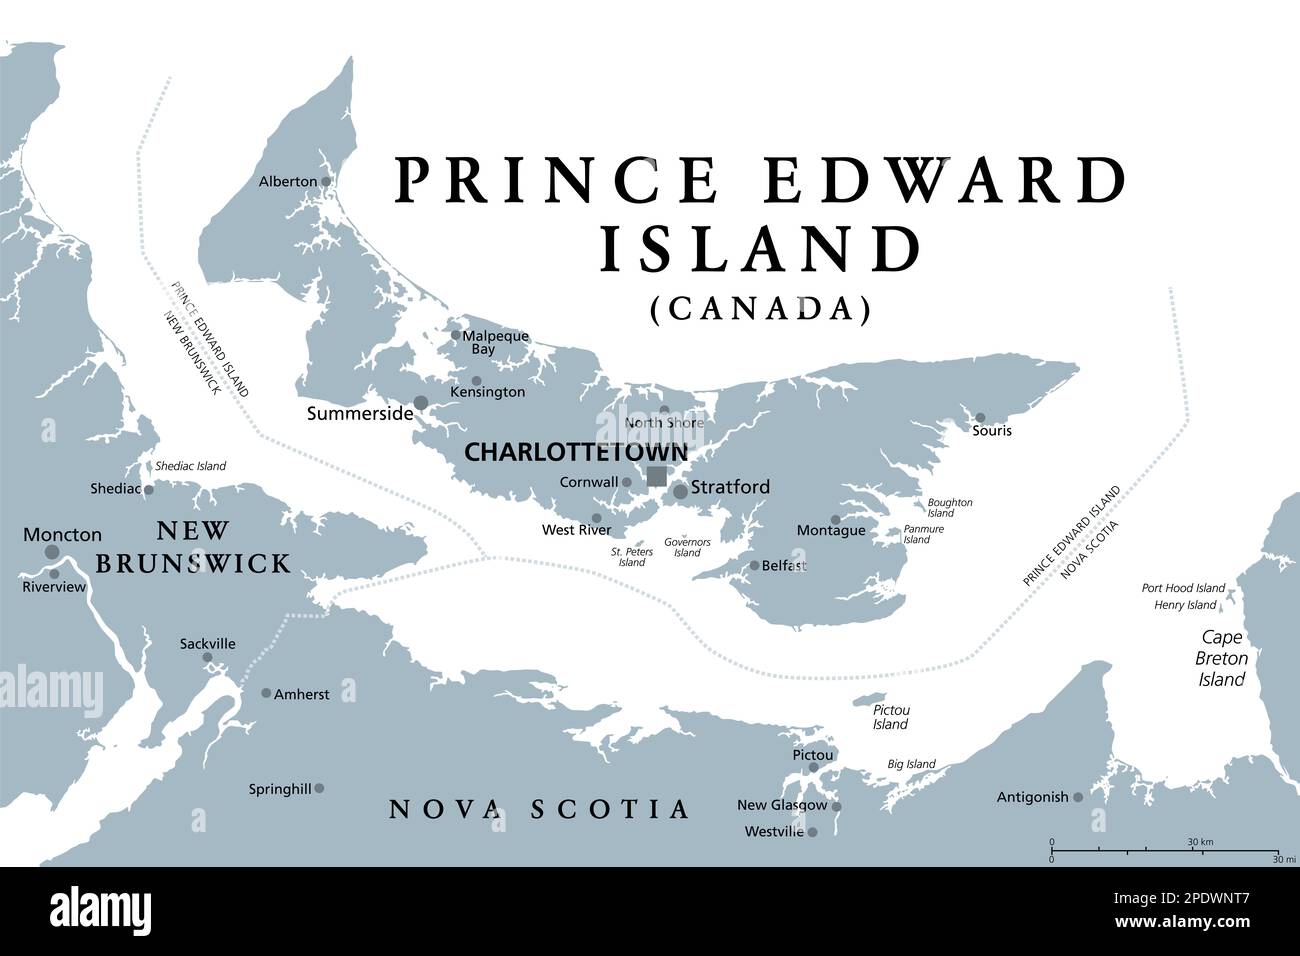 Prince Edward Island, Maritime and Atlantic province of Canada, gray political map. Known as The Island, in Gulf of St. Lawrence. Stock Photo